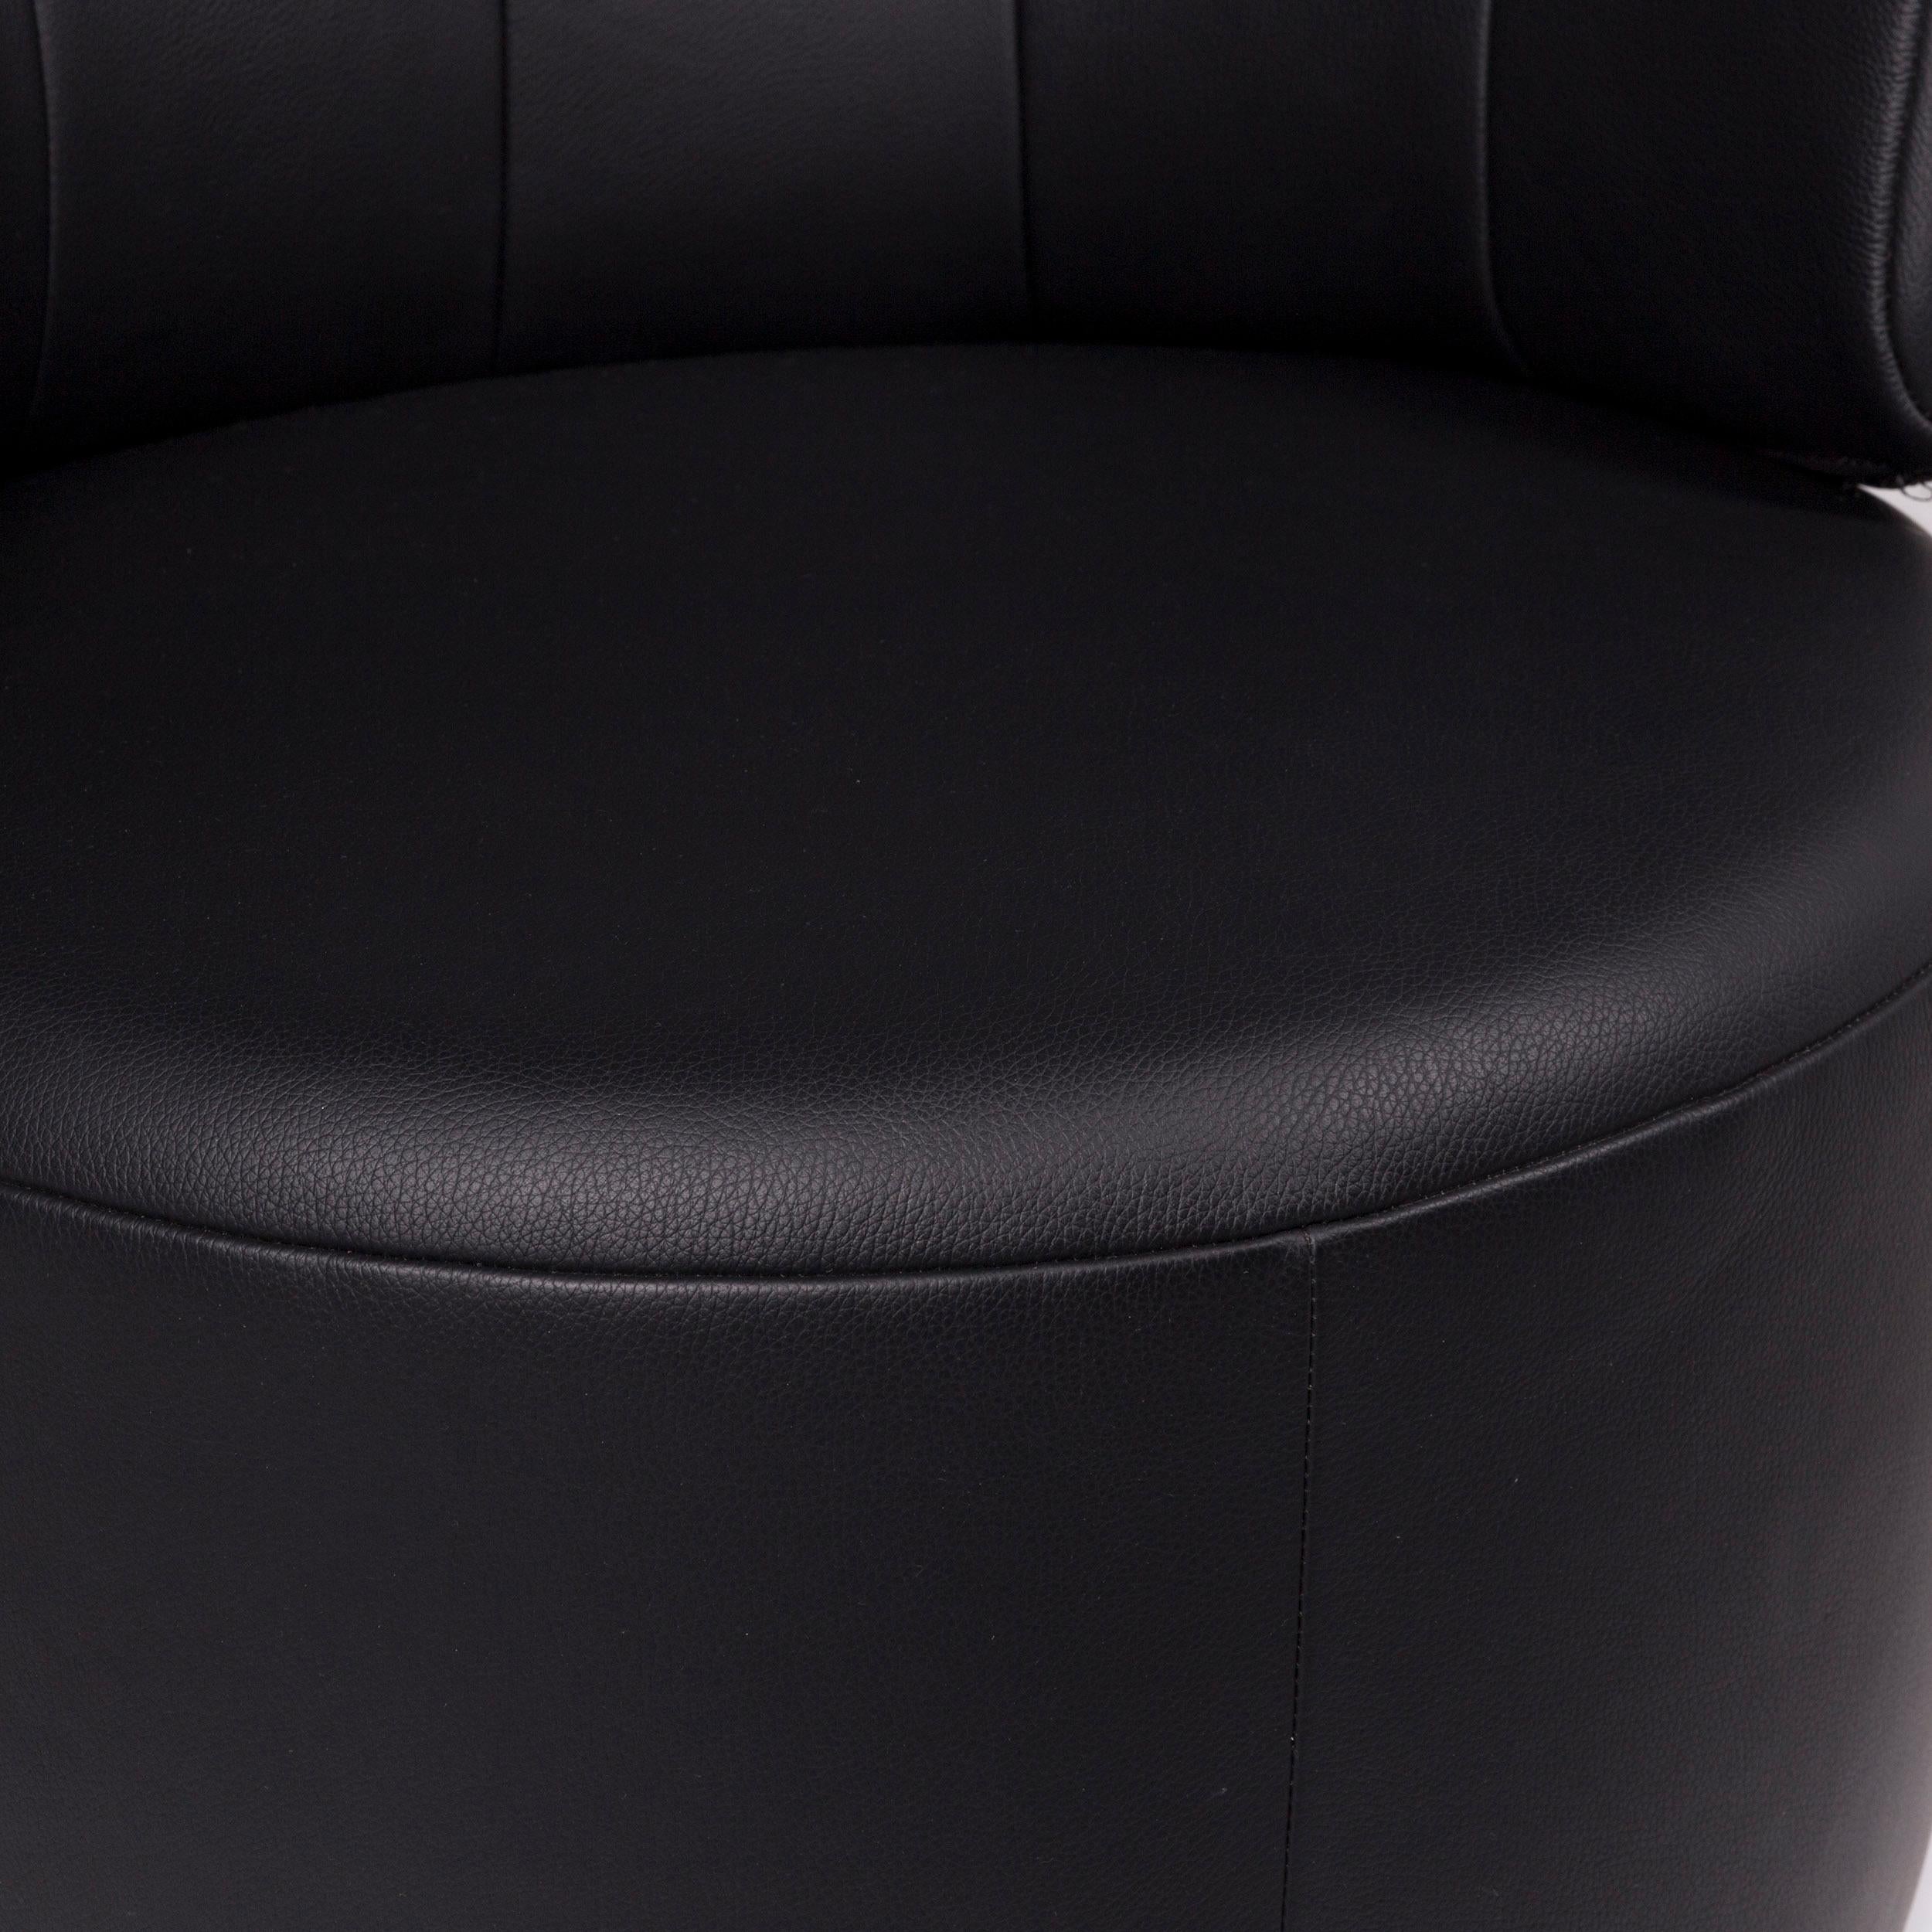 We bring to you a Rolf Benz Loop 684 leather armchair black.

 

 Product measurements in centimeters:
 

Depth 77
Width 81
Height 73
Seat-height 41
Rest-height 70
Seat-depth 57
Seat-width 52
Back-height 35.